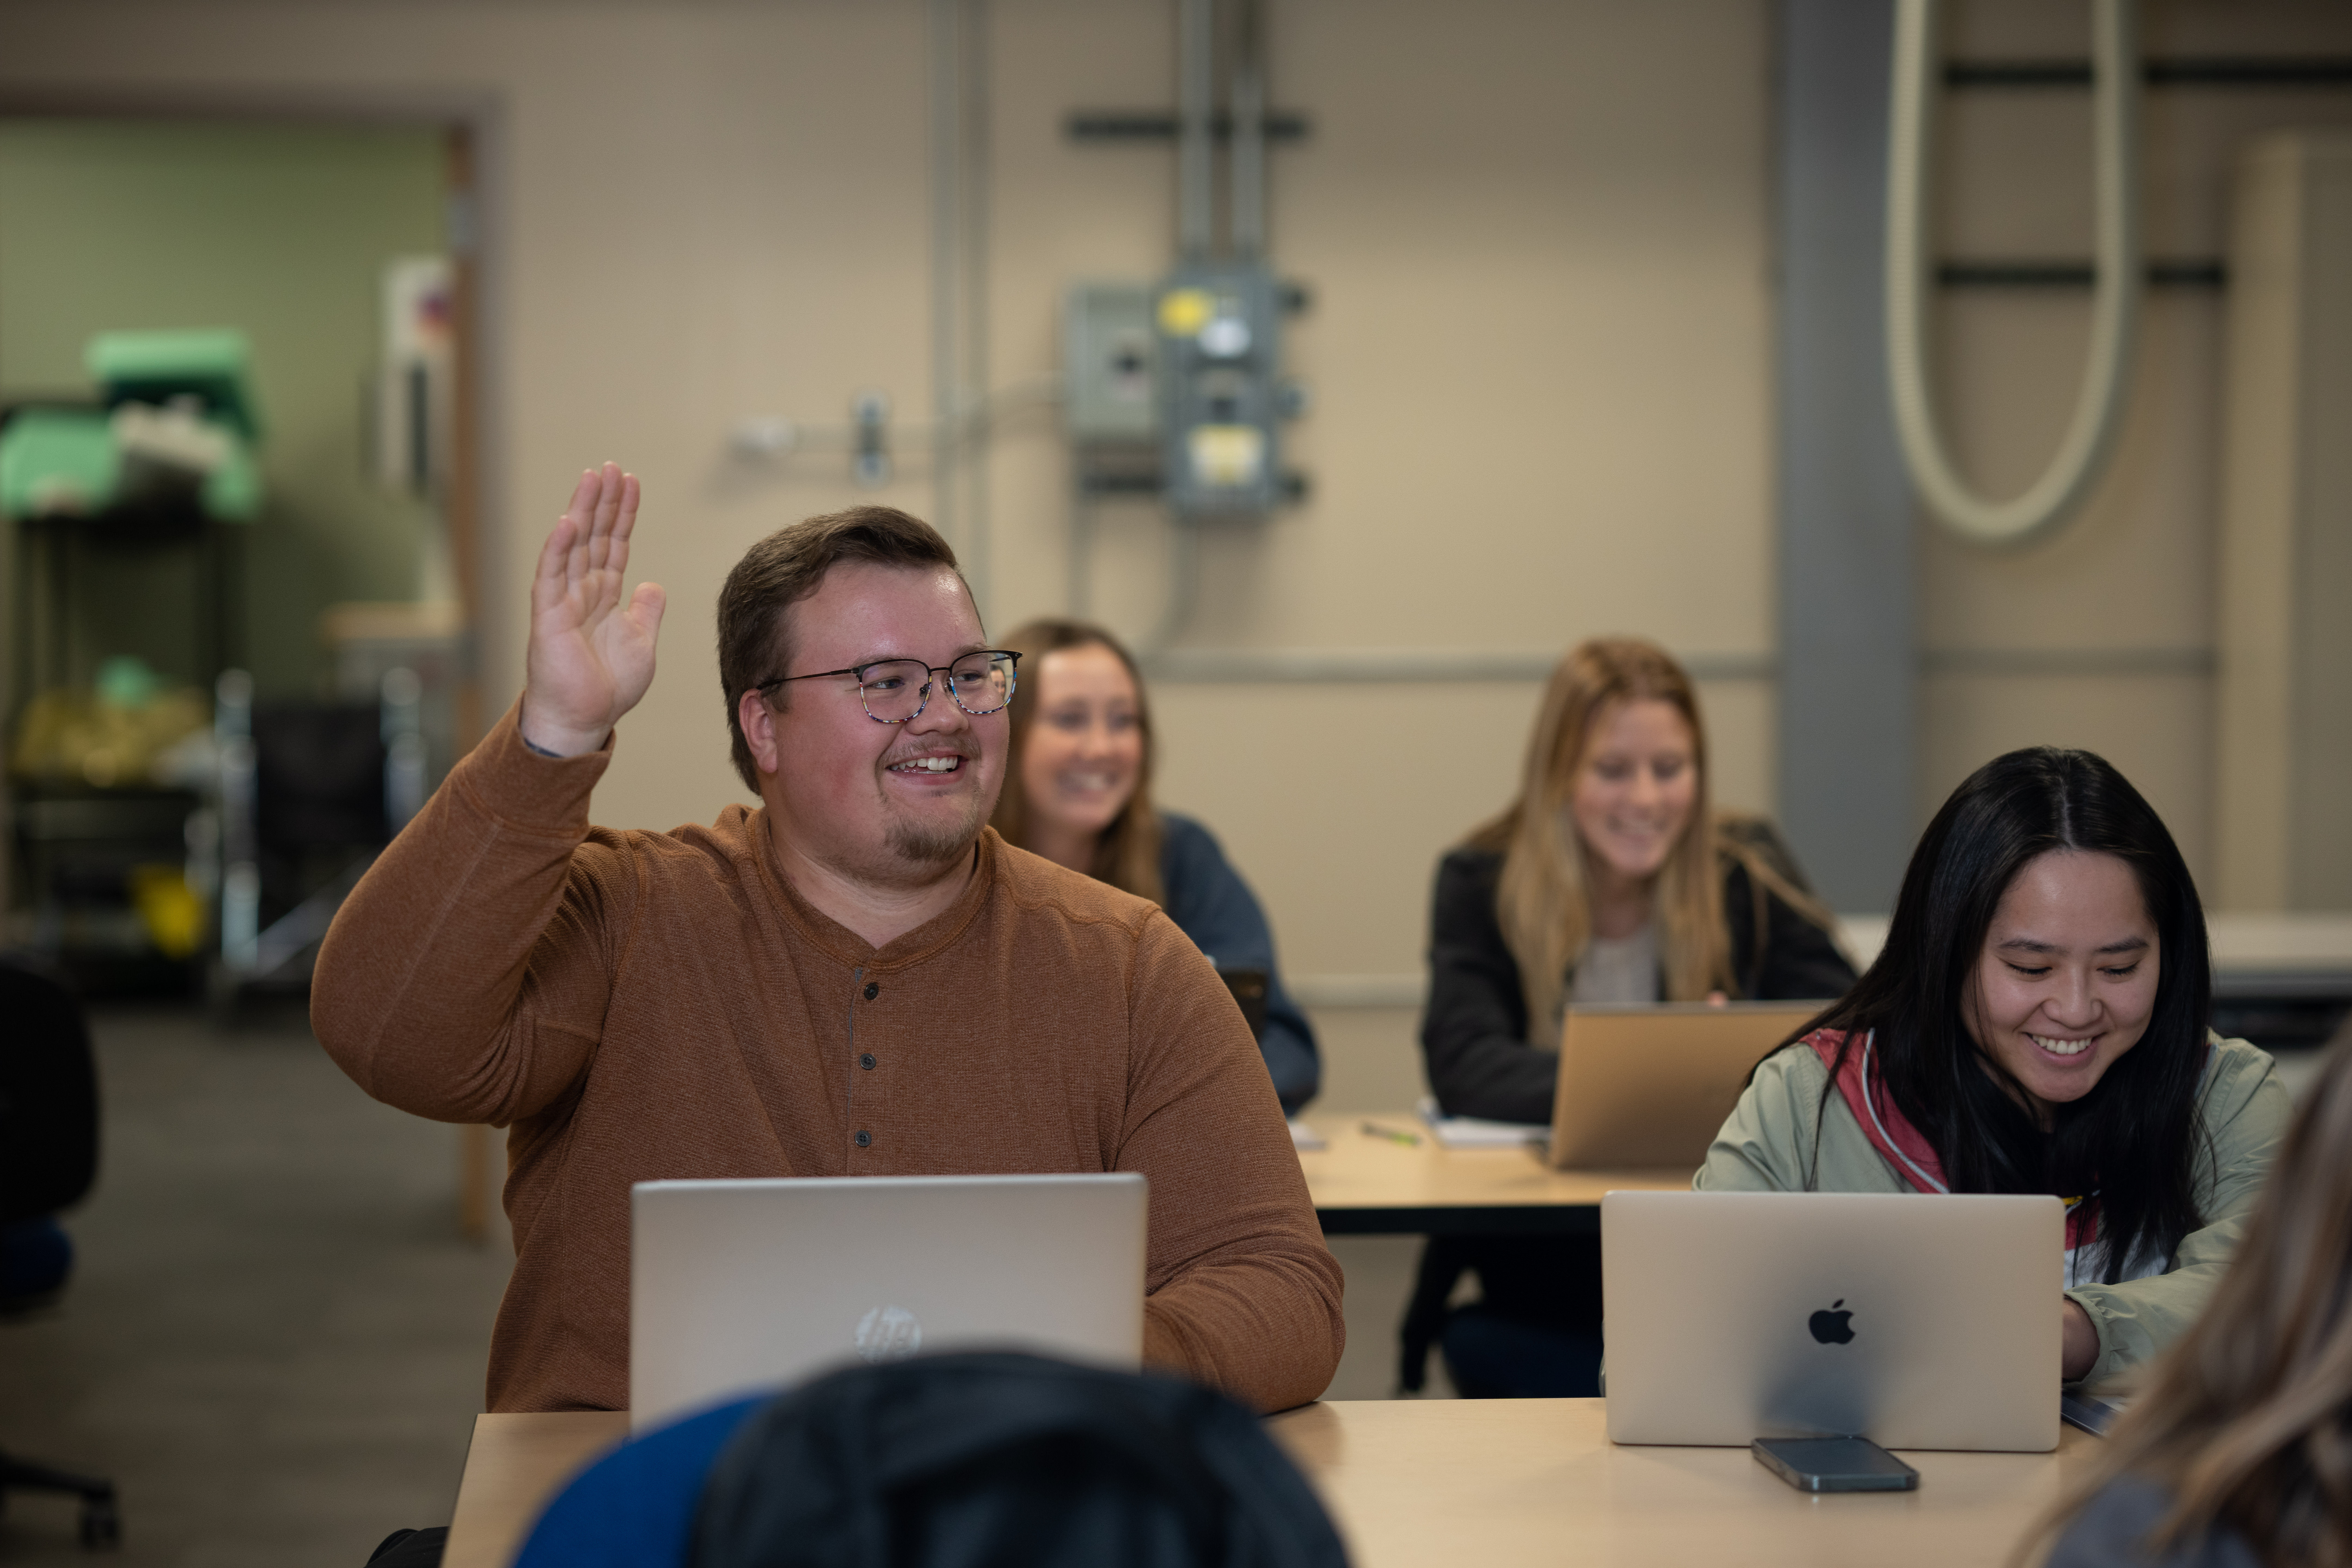 M State student raising his hand in a DL classroom